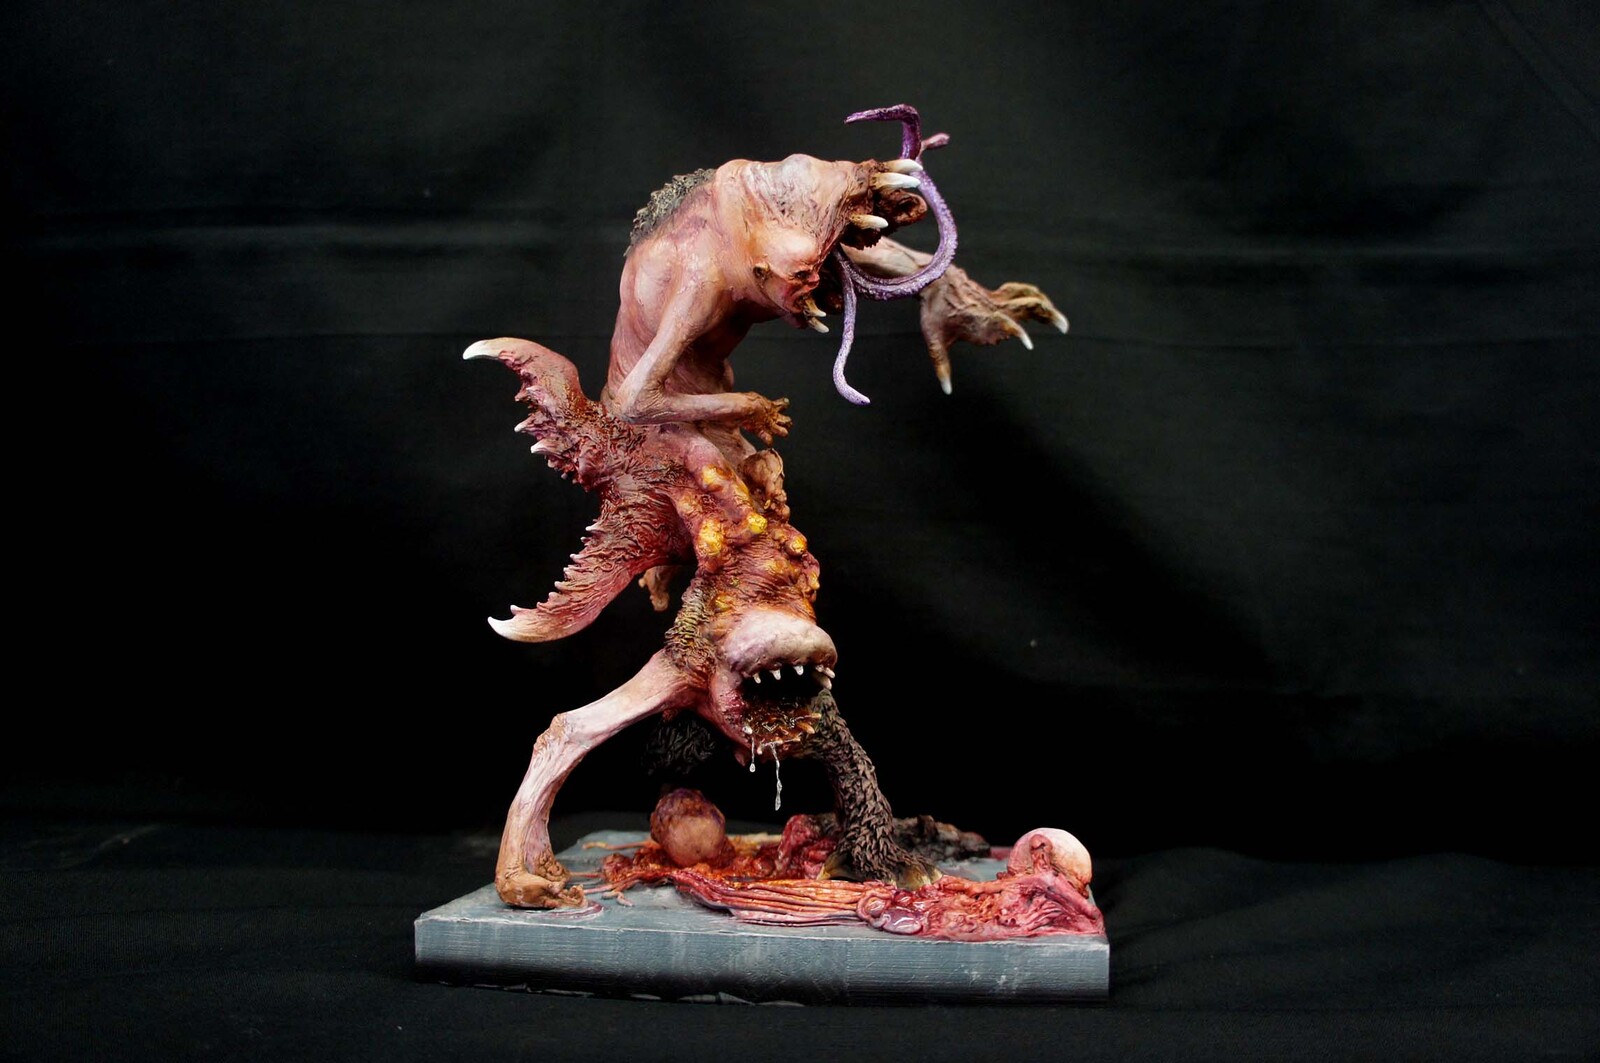 John Carpenter "The Thing"  Blair Who Goes There Monster Art Statue 
https://www.solidart.club